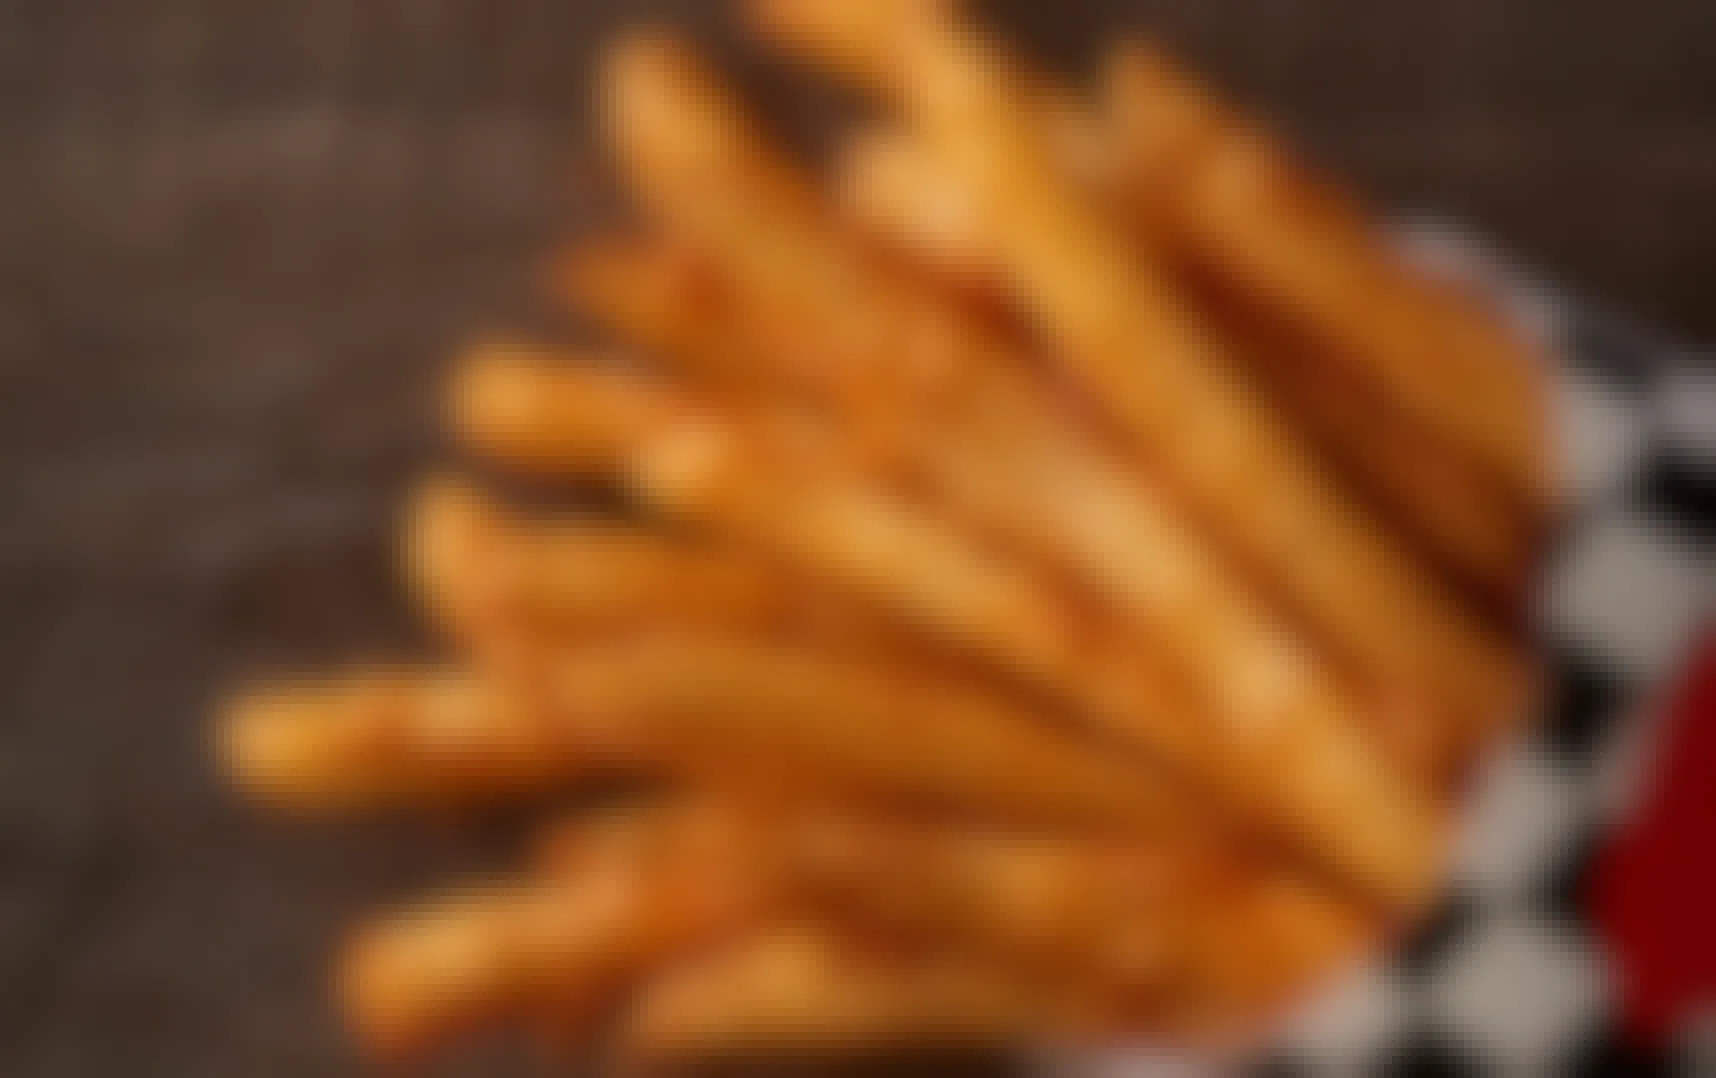 A close up of a large fry from Checkers on a table.